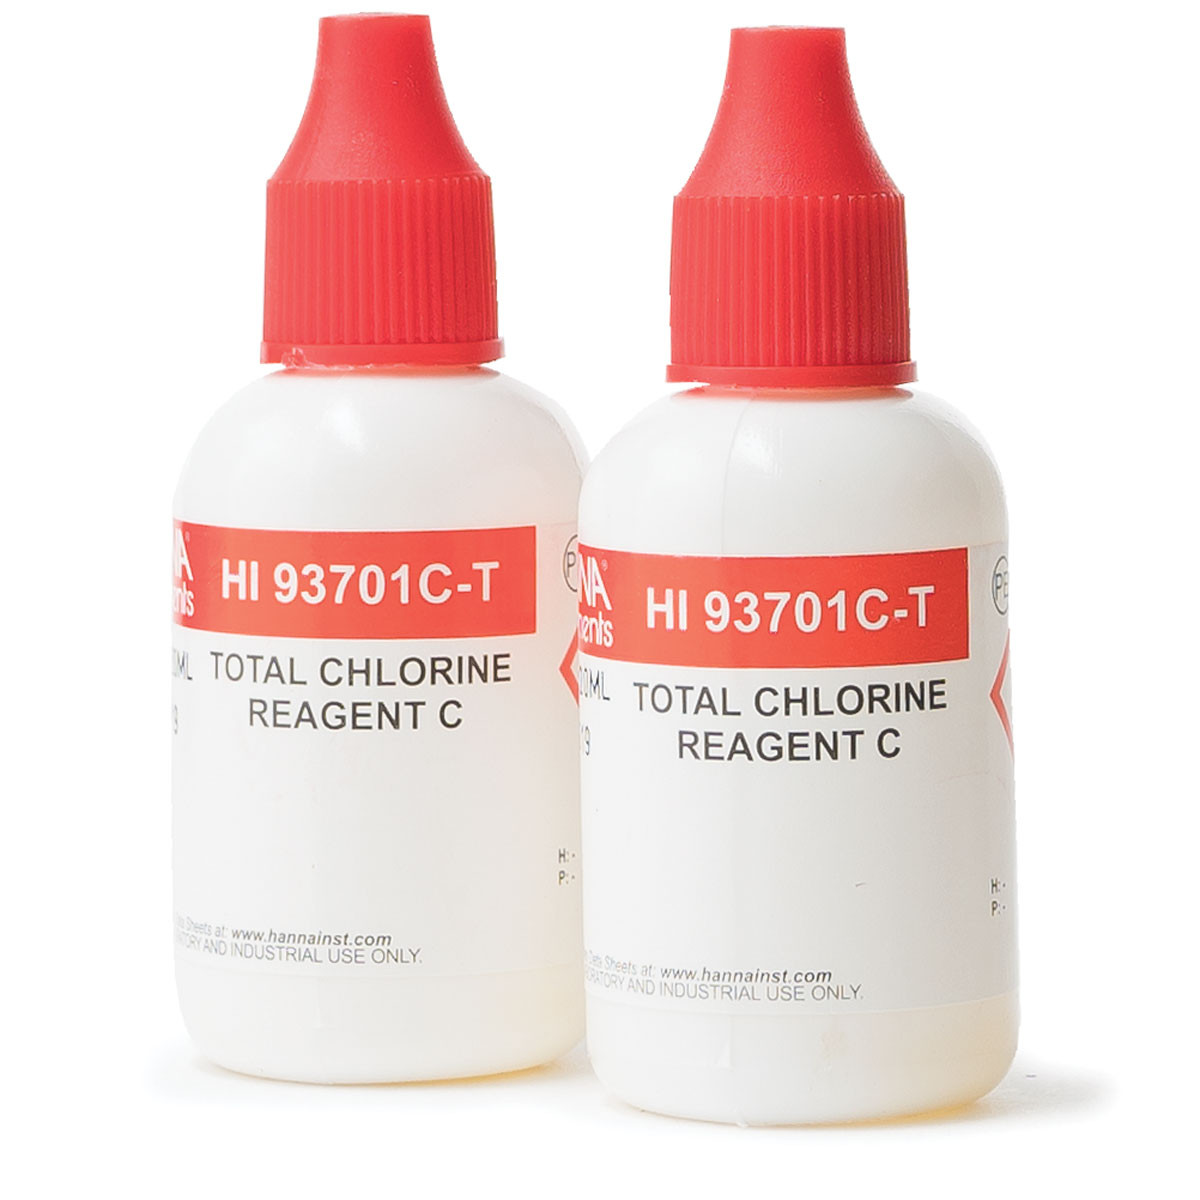 DPD3 Liquid Reagent for Total Chlorine (600 tests)